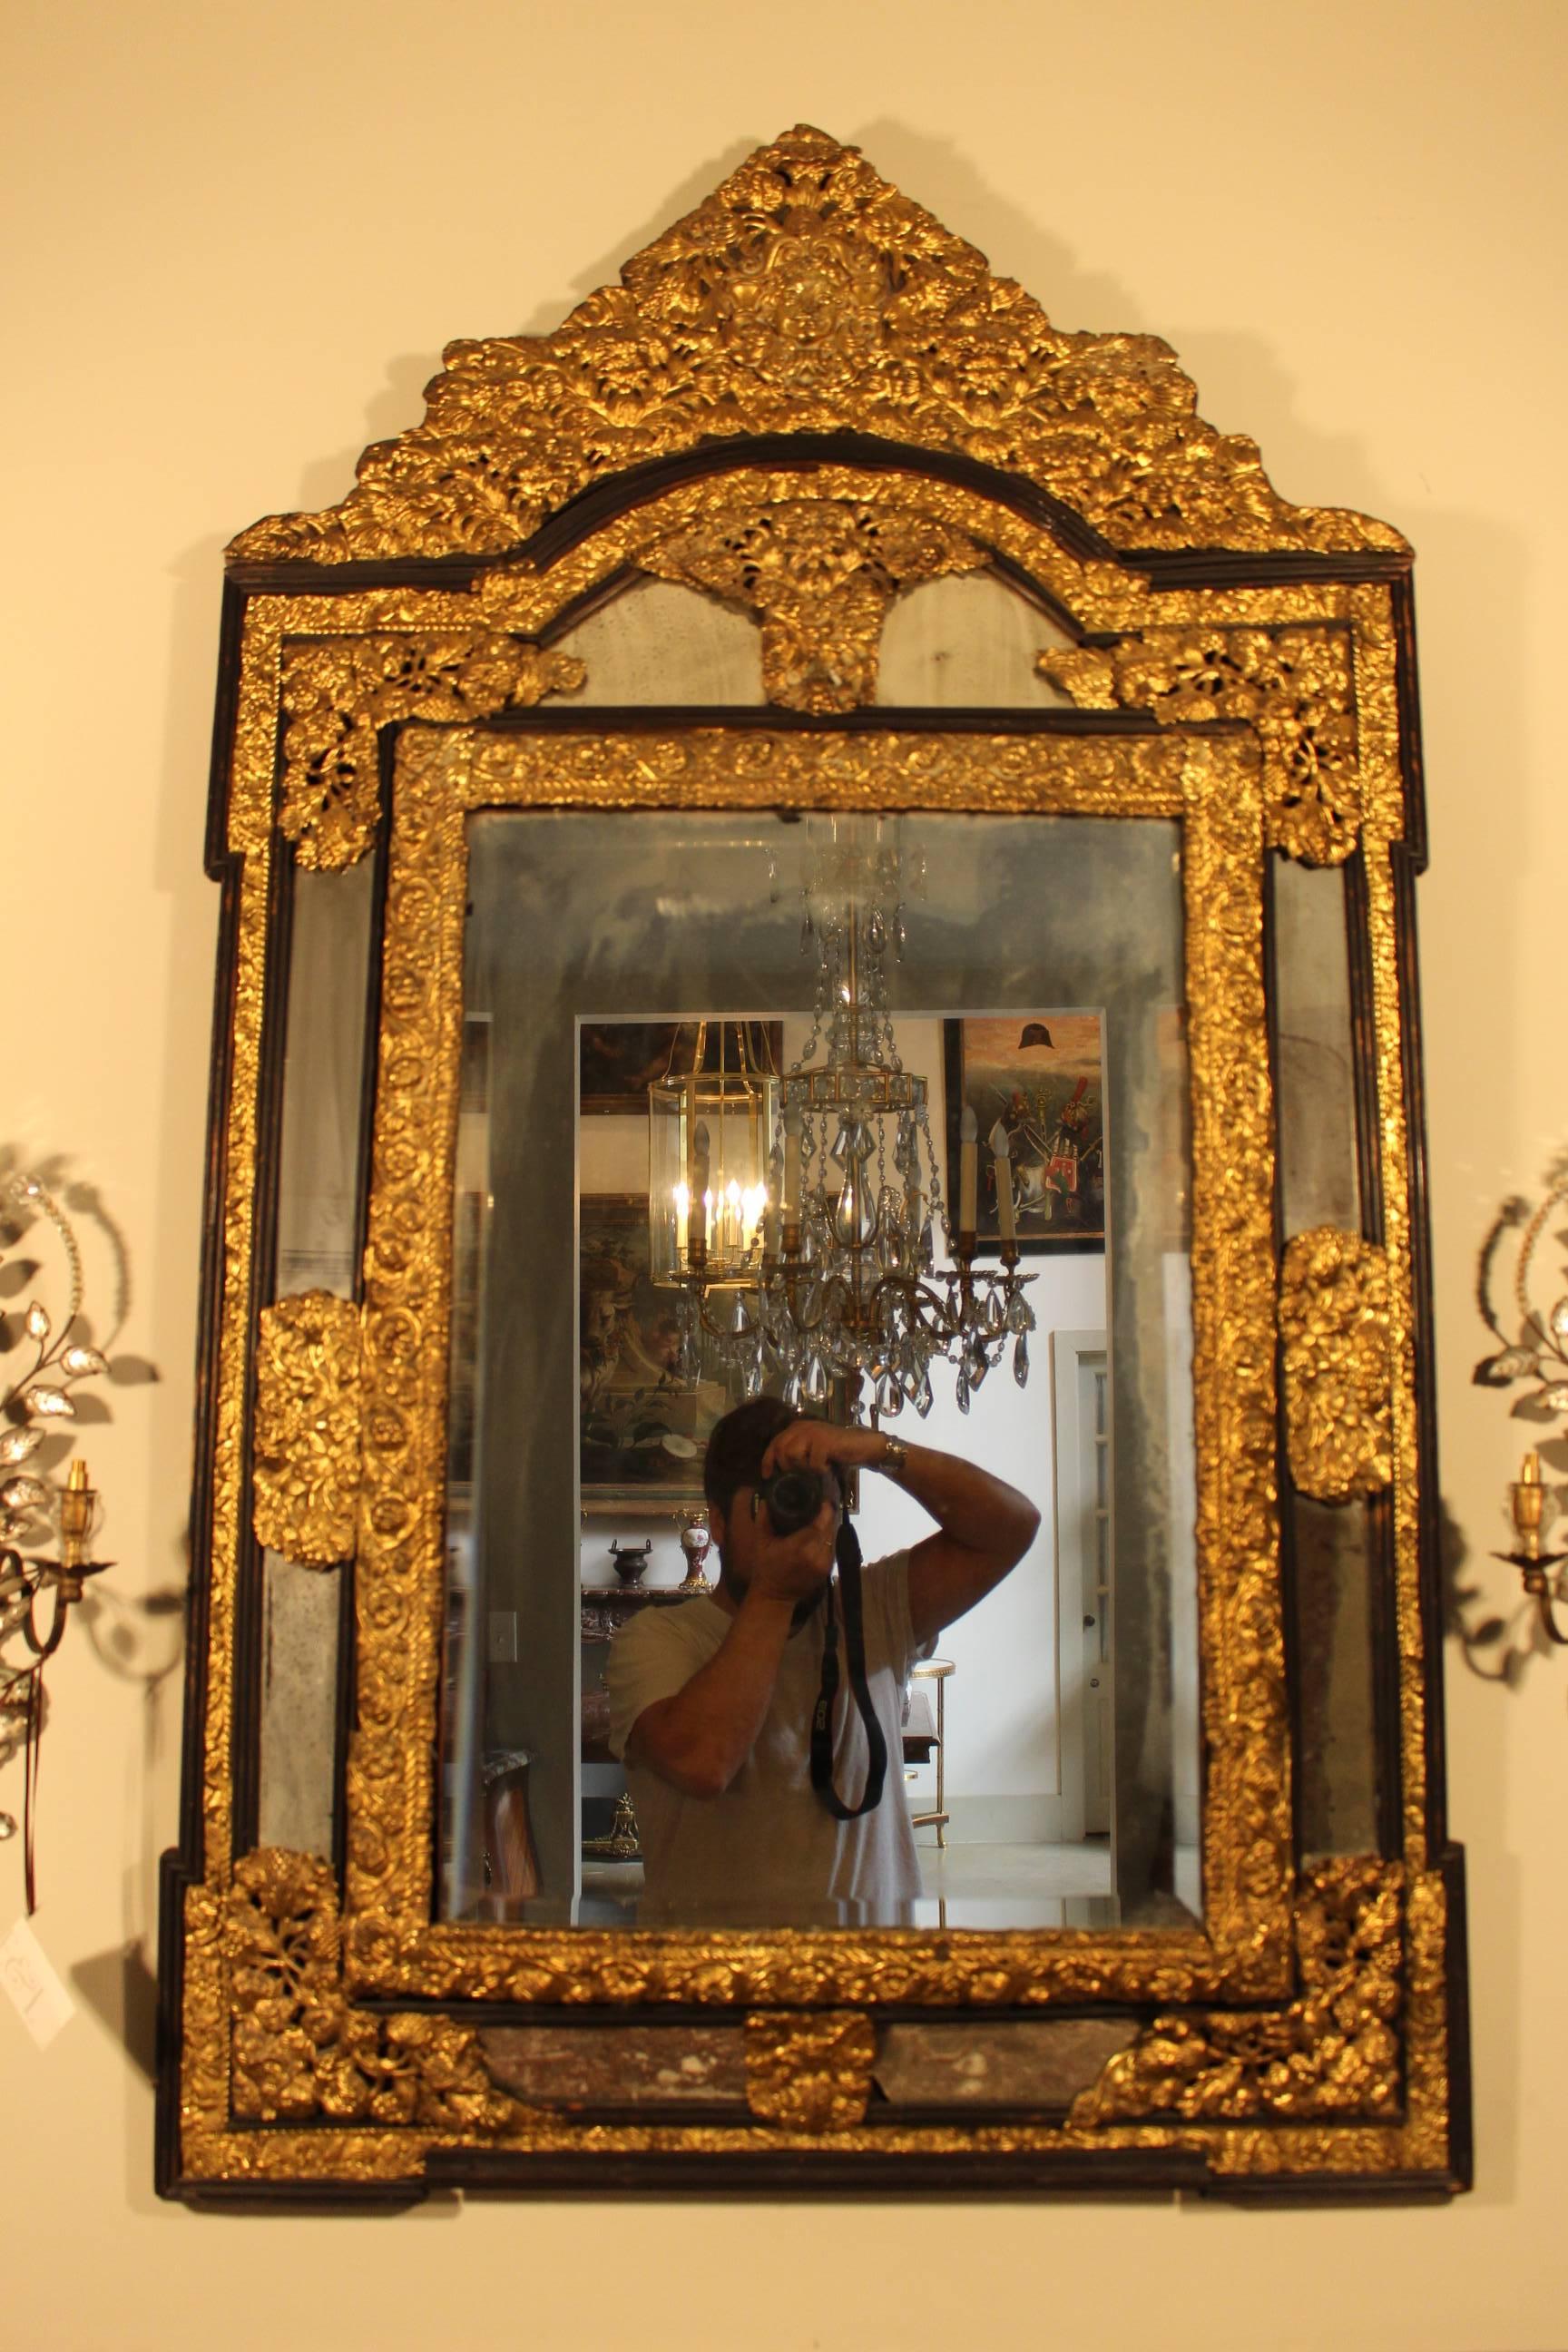 A French Regence style repoussee mirror, mid-19th century.